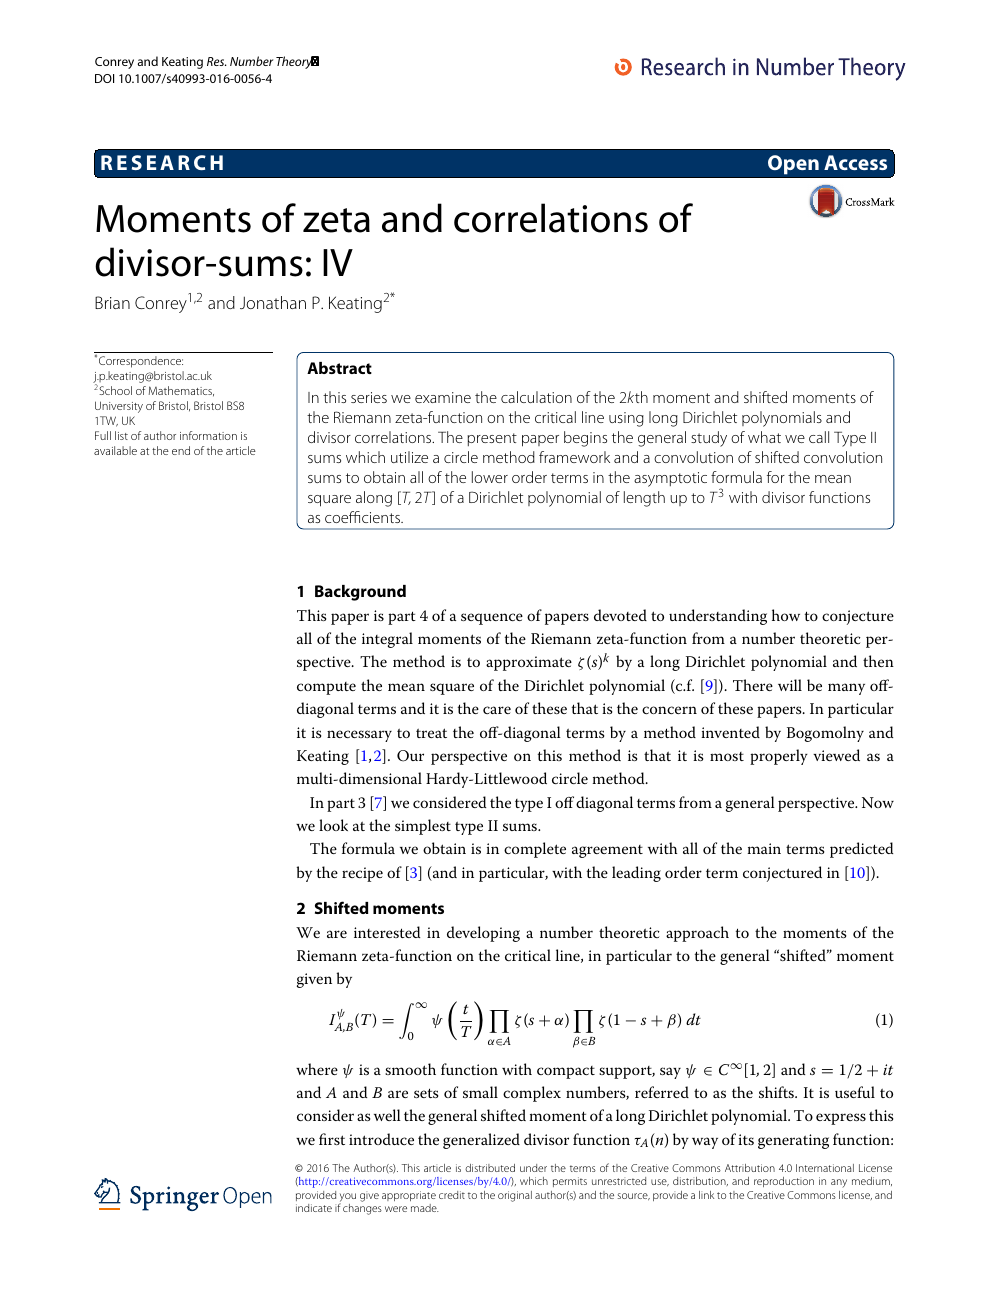 Moments Of Zeta And Correlations Of Divisor Sums Iv Topic Of Research Paper In Physical Sciences Download Scholarly Article Pdf And Read For Free On Cyberleninka Open Science Hub